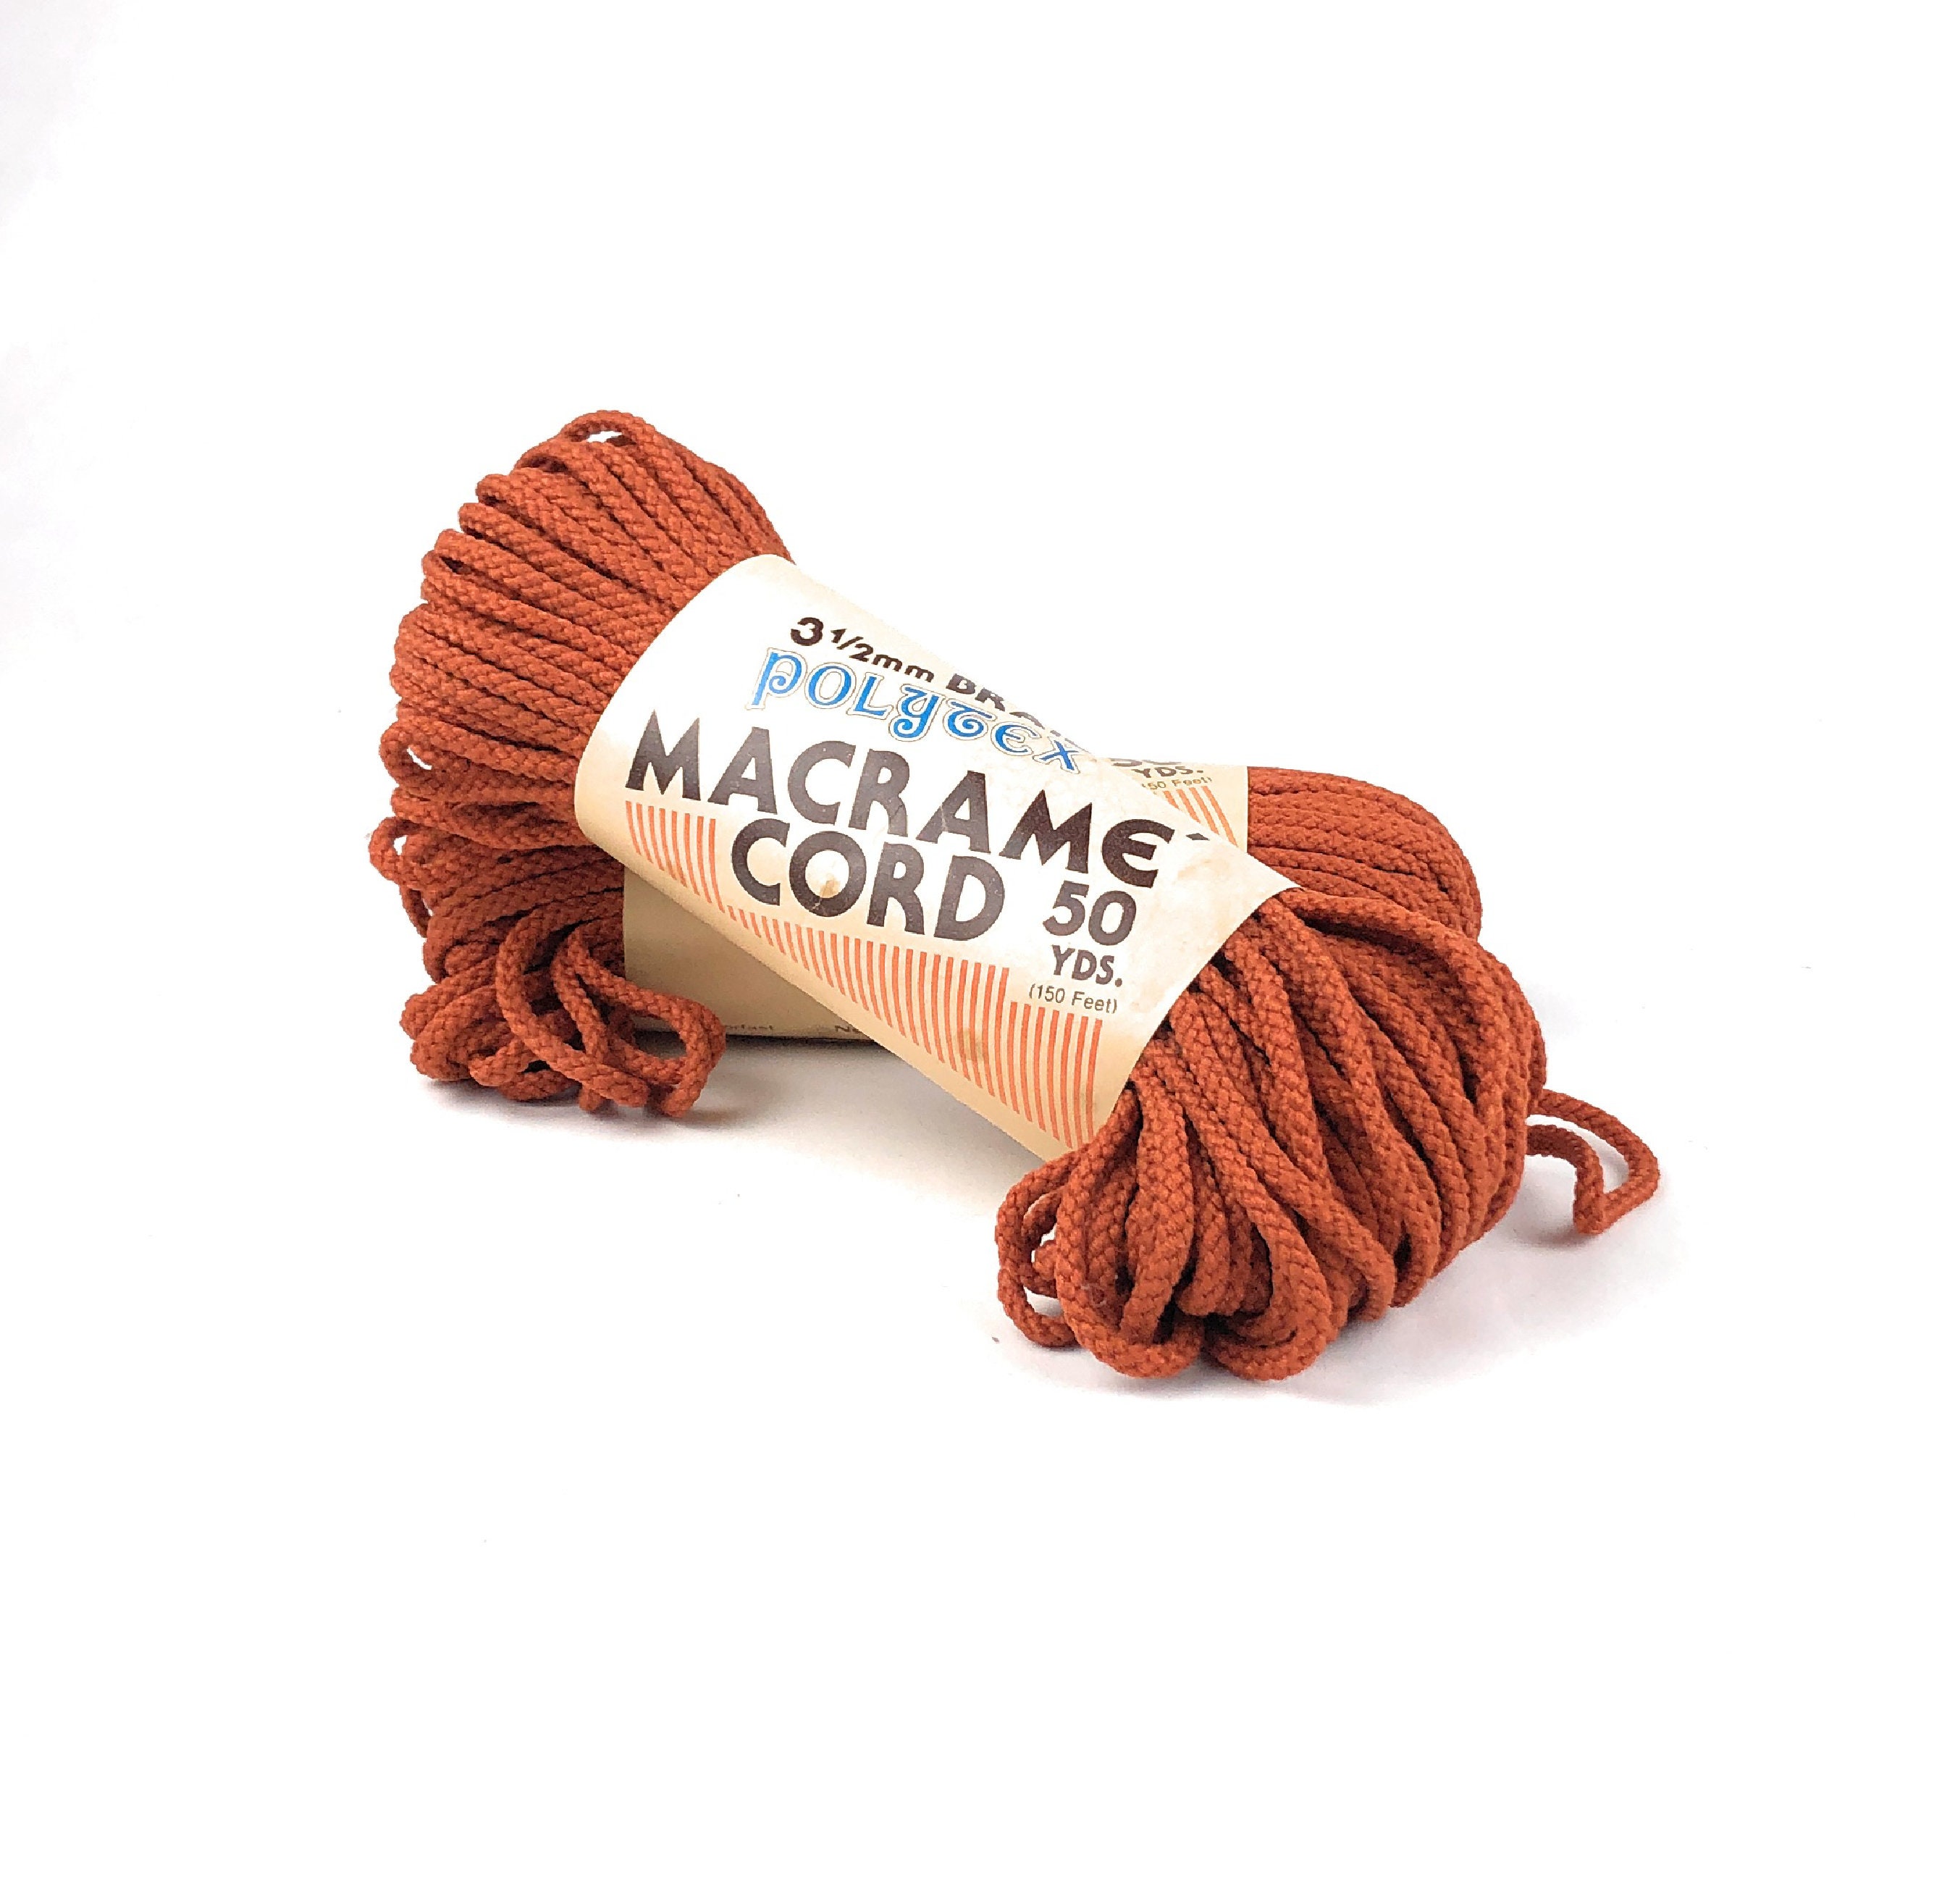 Macrame Cord 6mm, Macrame Rope 6mm, Polyester Cord, Knitted Cord